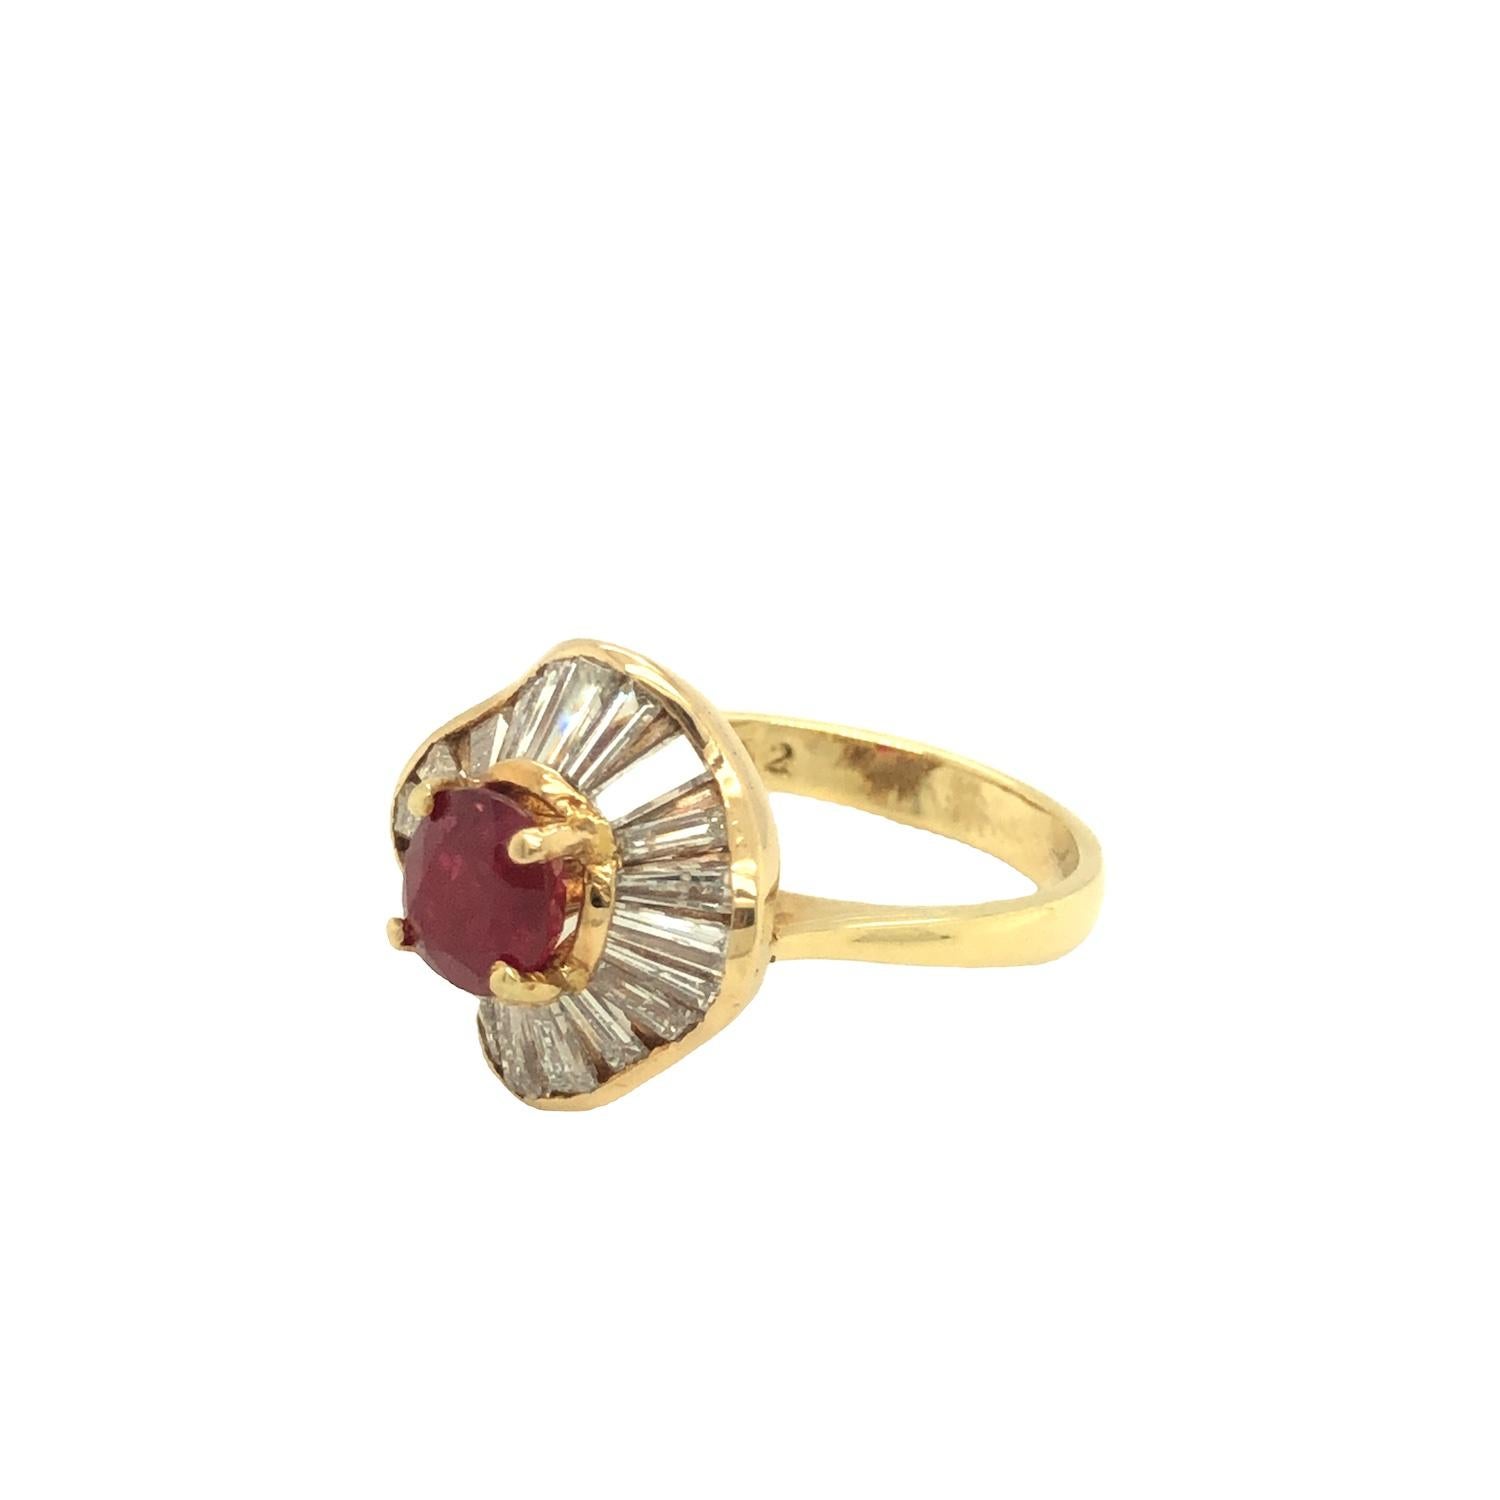 GIA Certified Ruby and Diamond Ring 14K Yellow Gold Ruby & Diamond  Ballerina Engagement Ring containing 1.42 carat round Ruby with 1.87 carat tapered diamonds baguette setting stamped 14K stamped initials HS. Size 6.5.